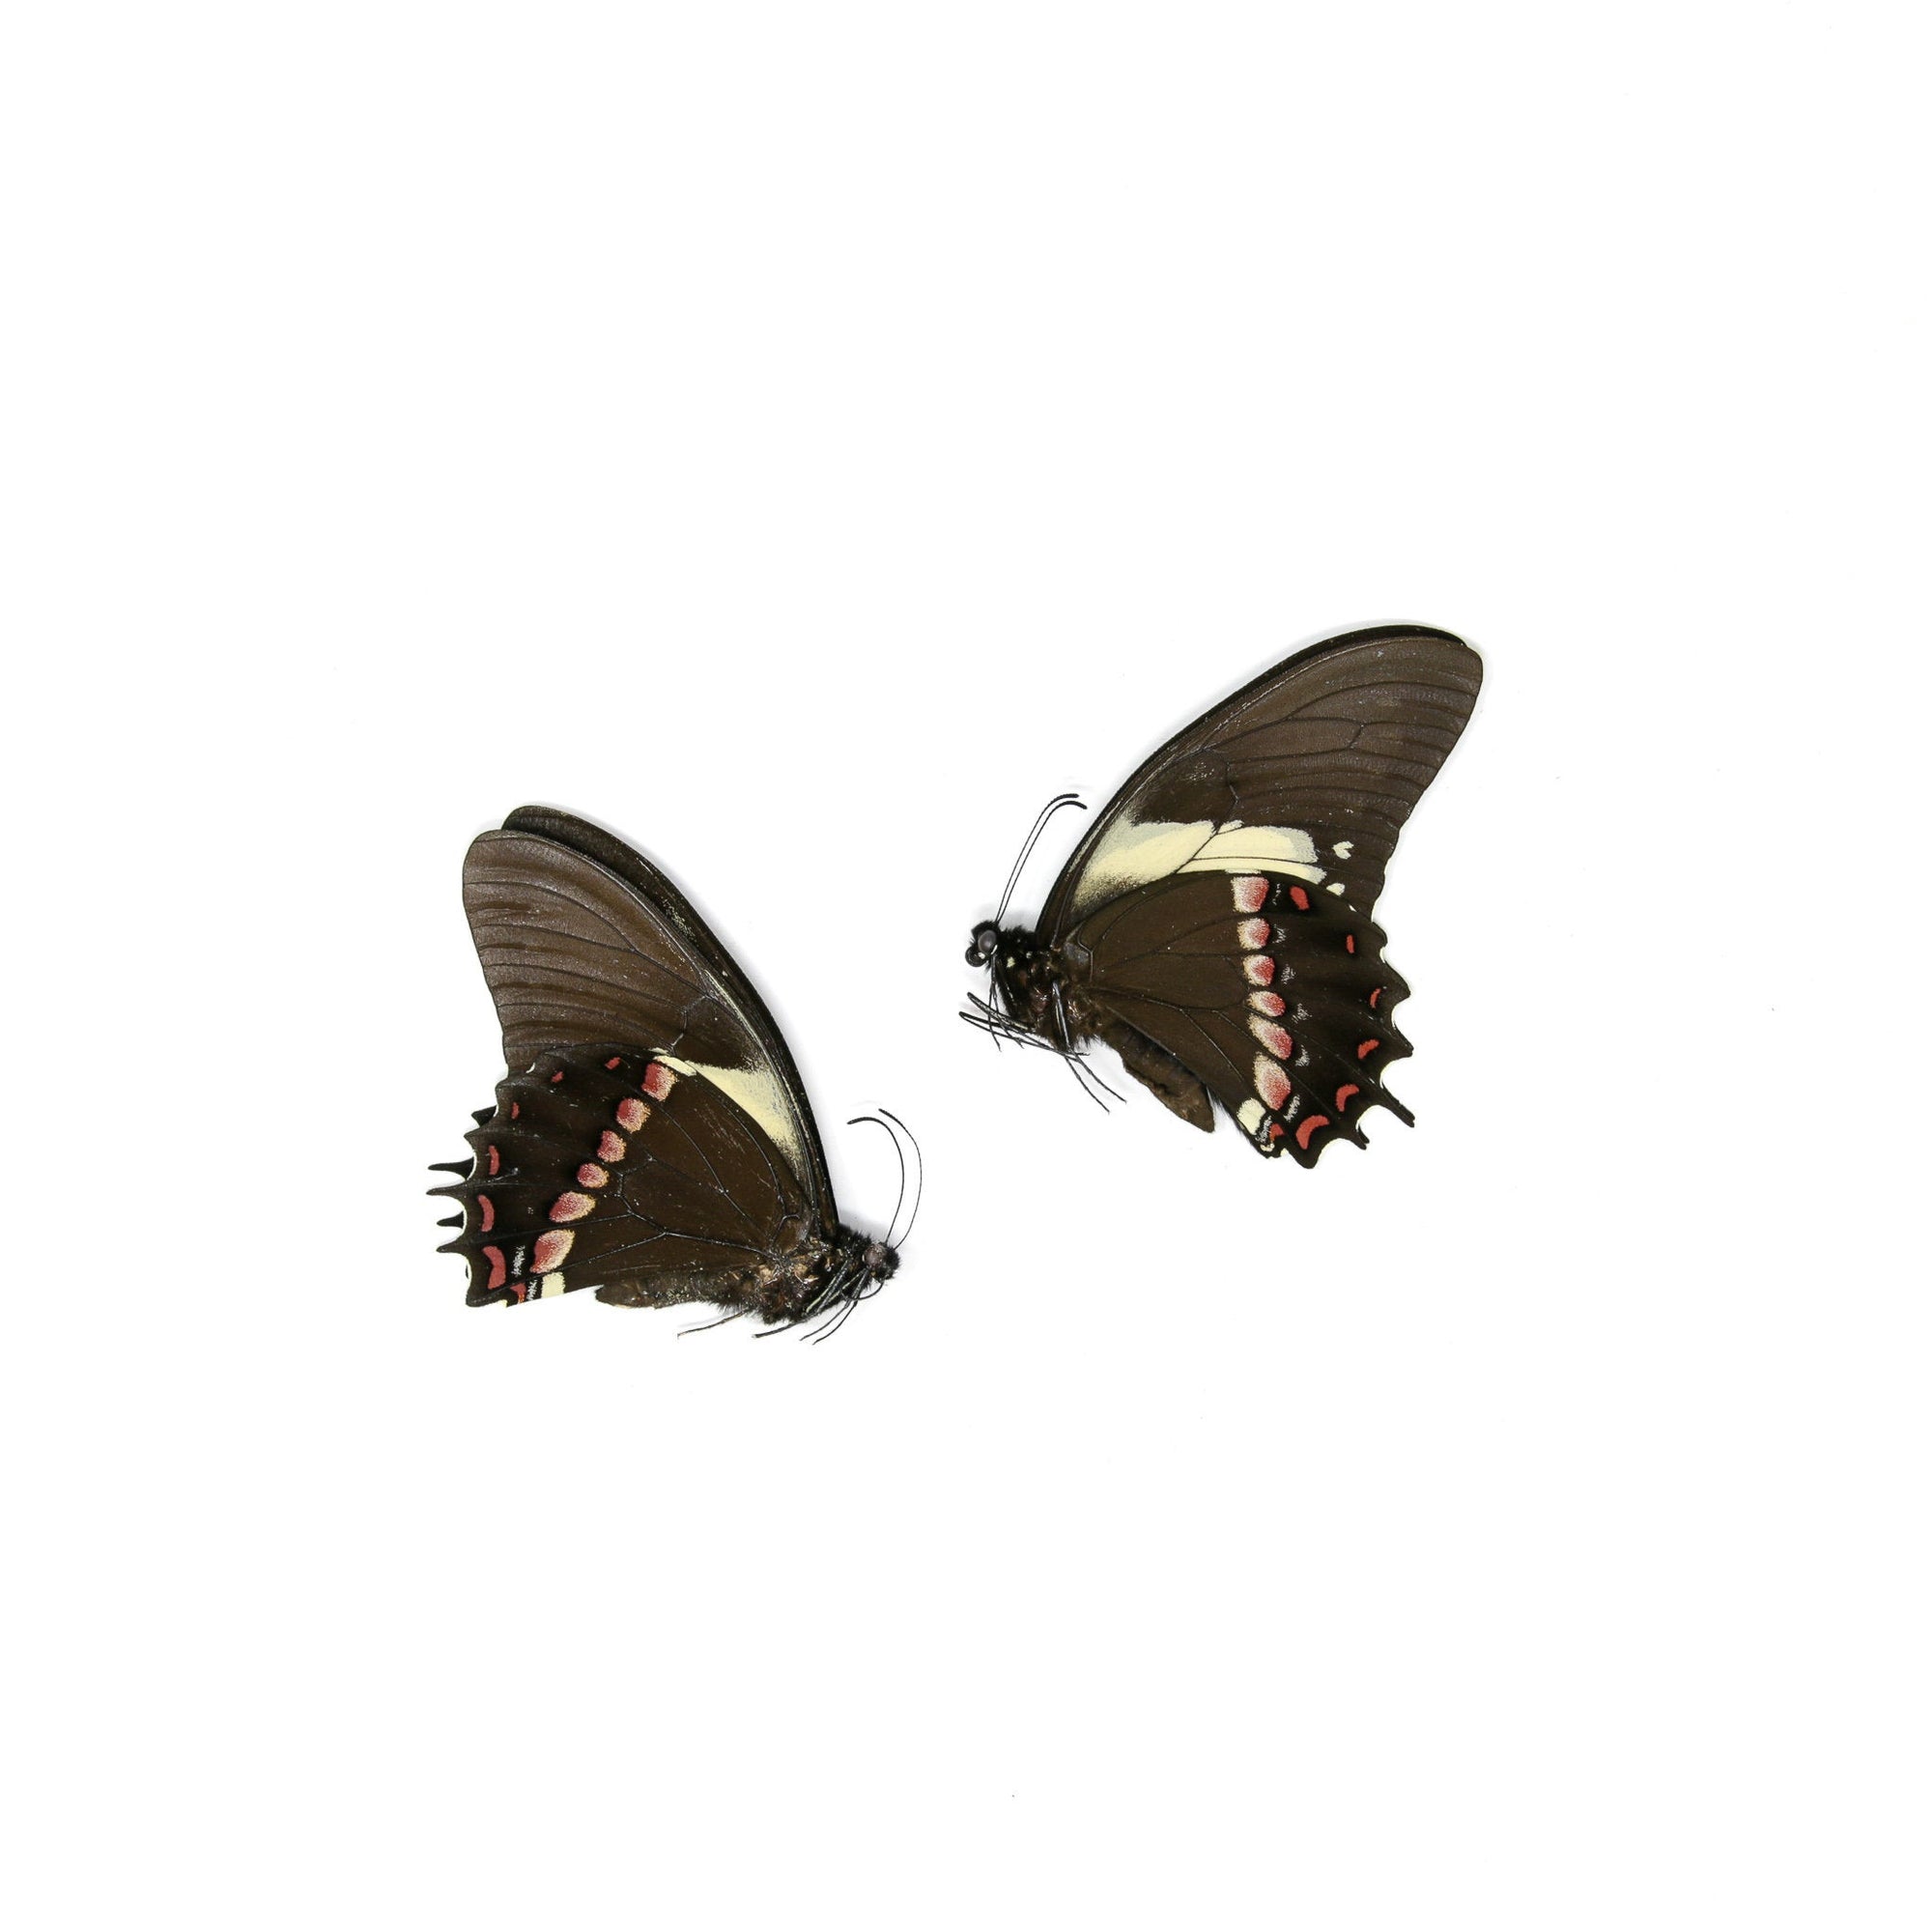 2 x Papilio aristeus bitias | Dry-Preserved Unmounted Butterfly Specimens A1